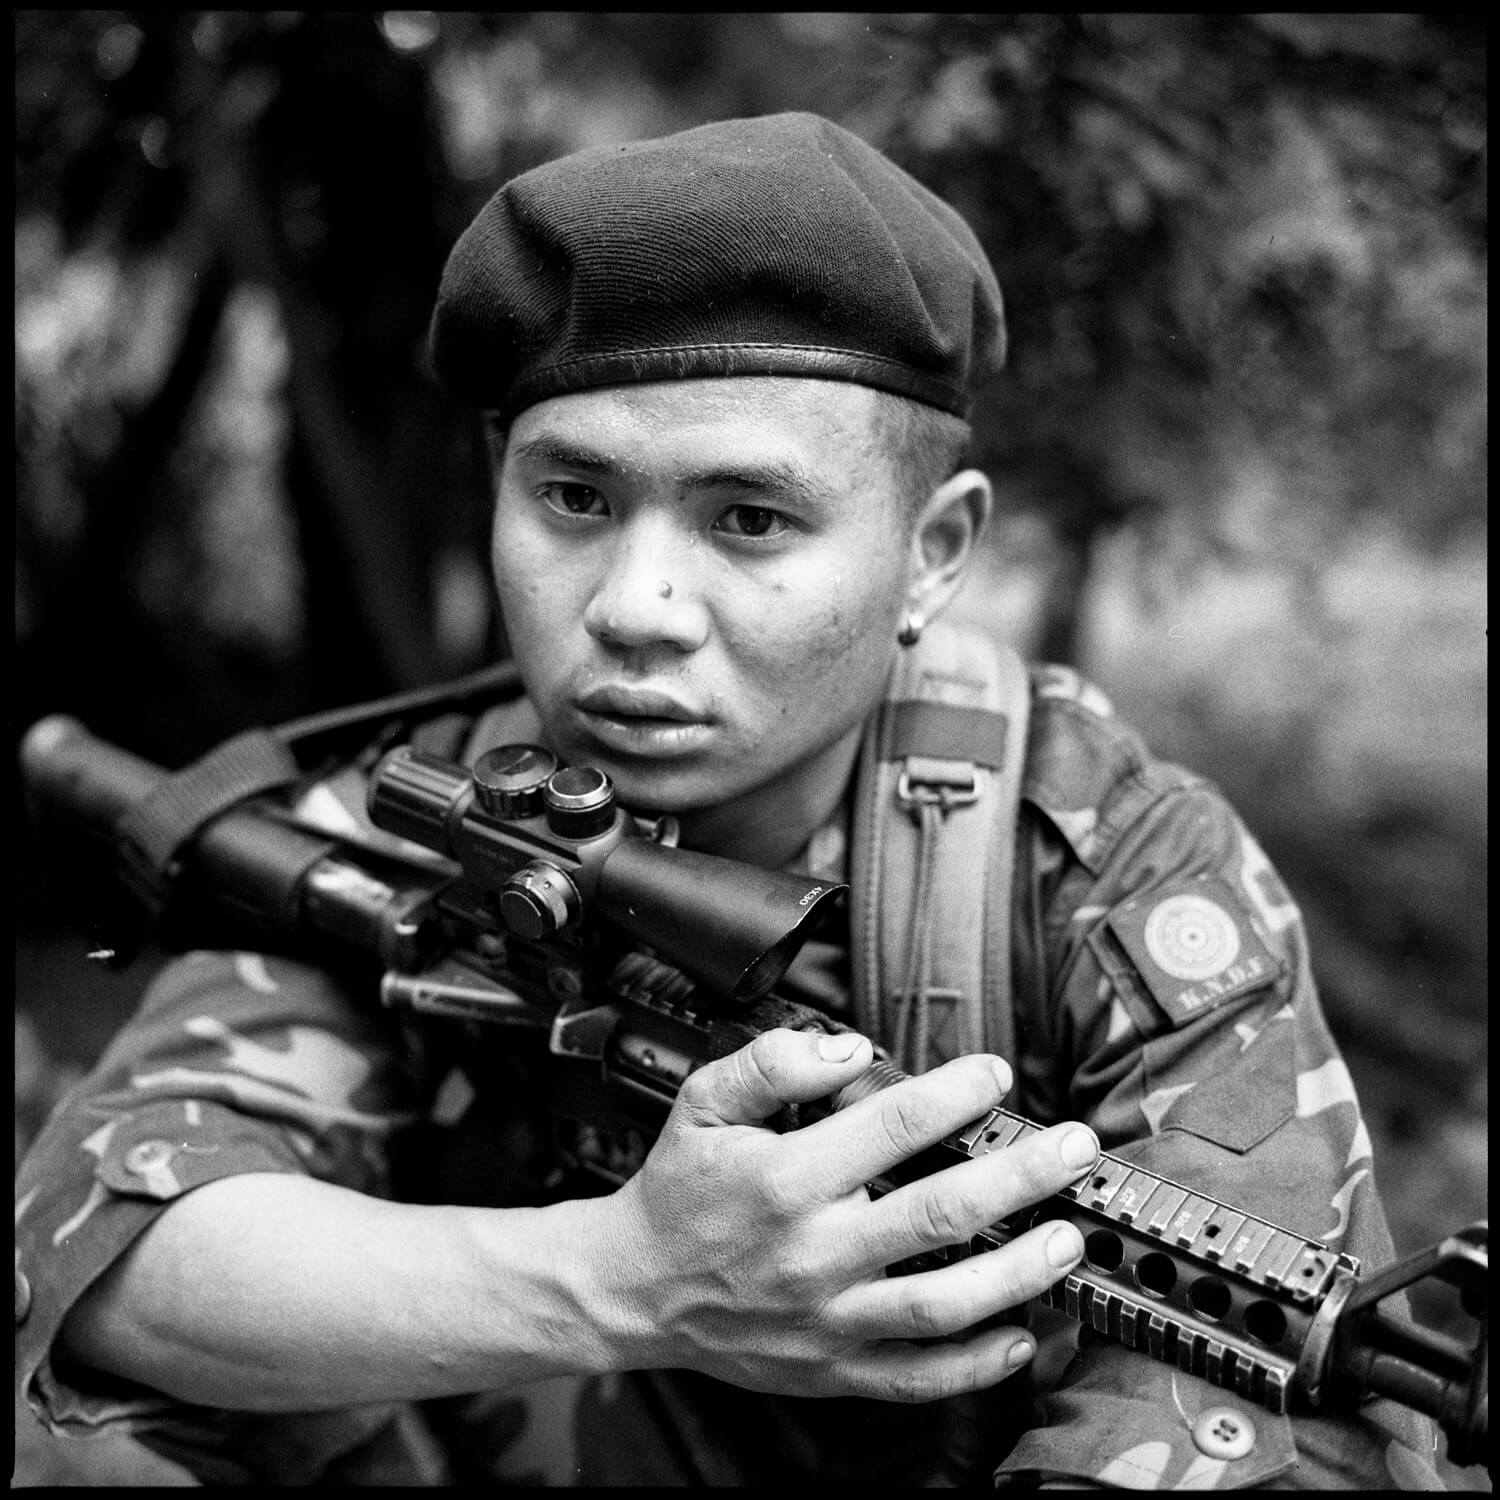 A soldier stares with a look of shocked reflection while clutching an automatic rifle across his chest.